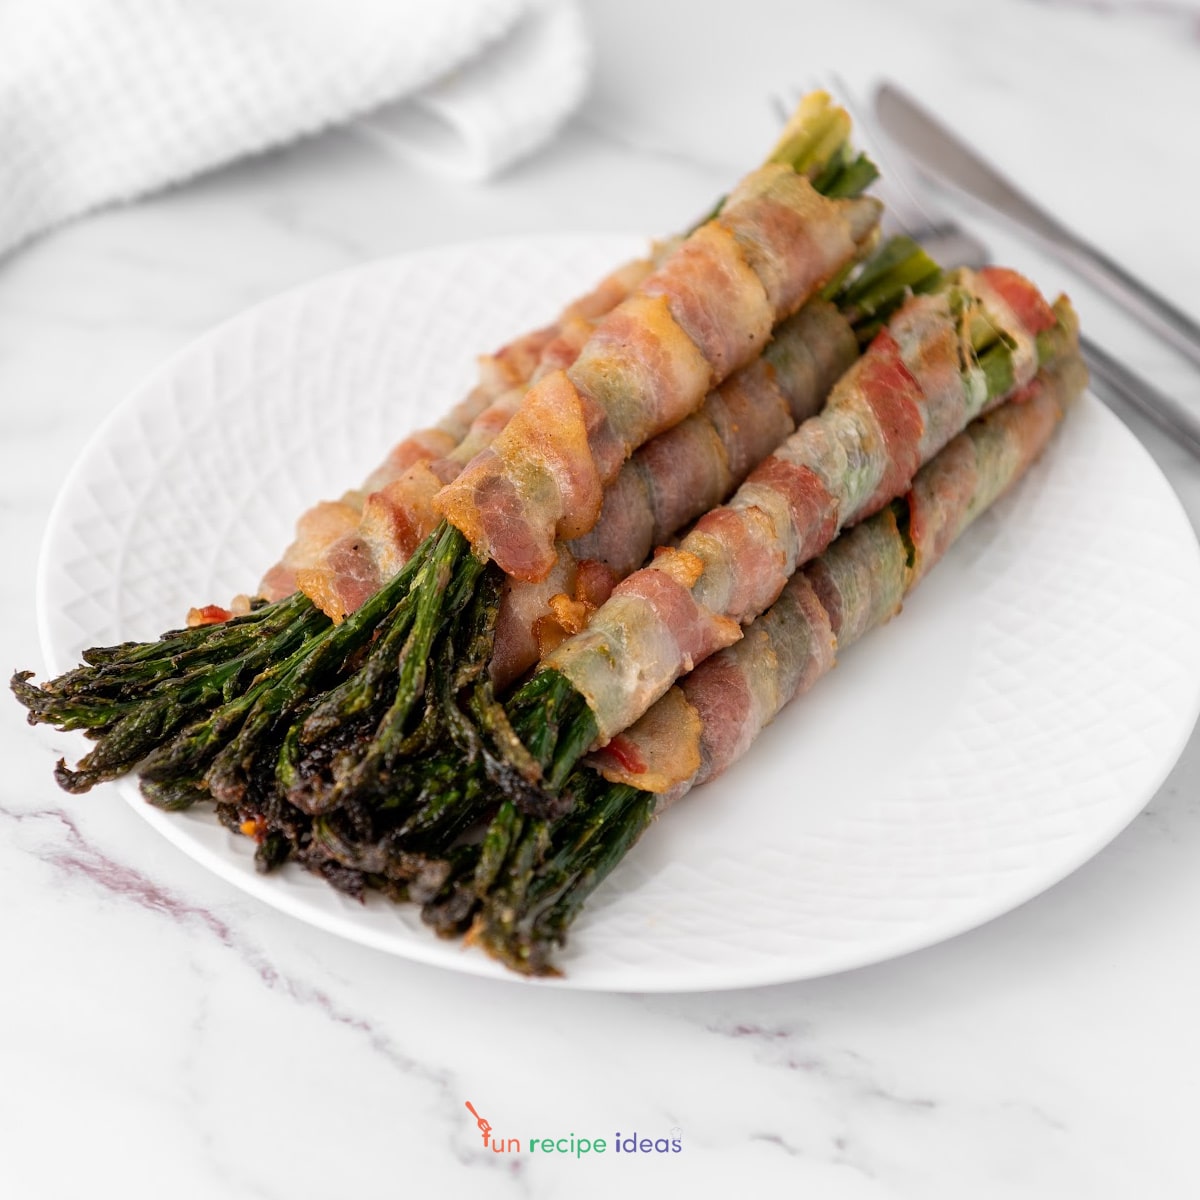 bacon wrapped asparagus on a white plate.